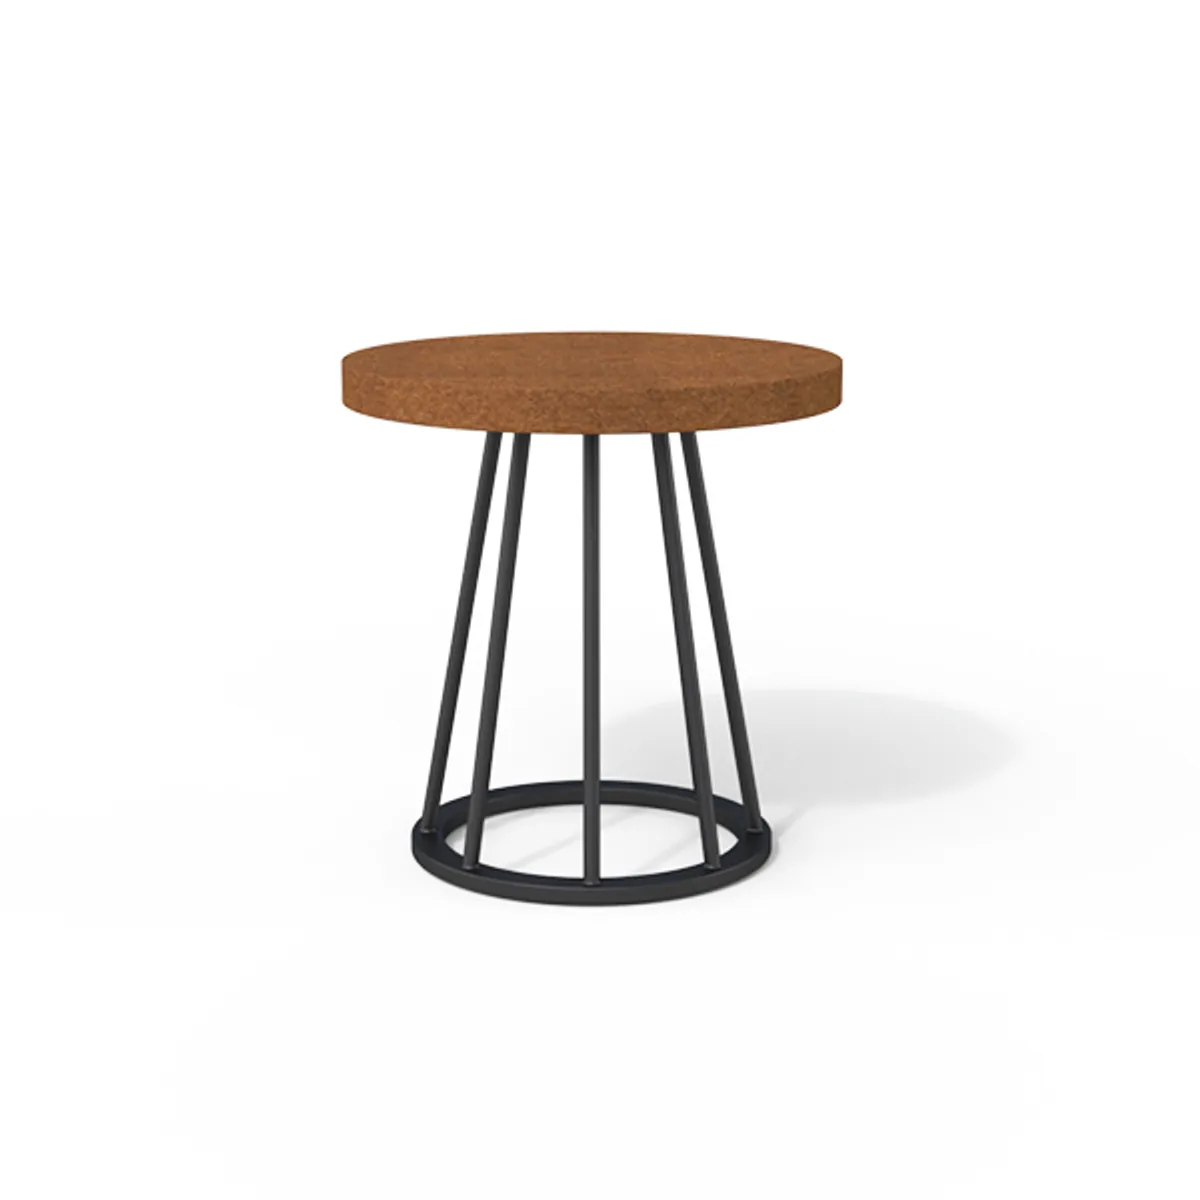 Cork Spoke Table Exclusive To Inside Out Contracts 0118